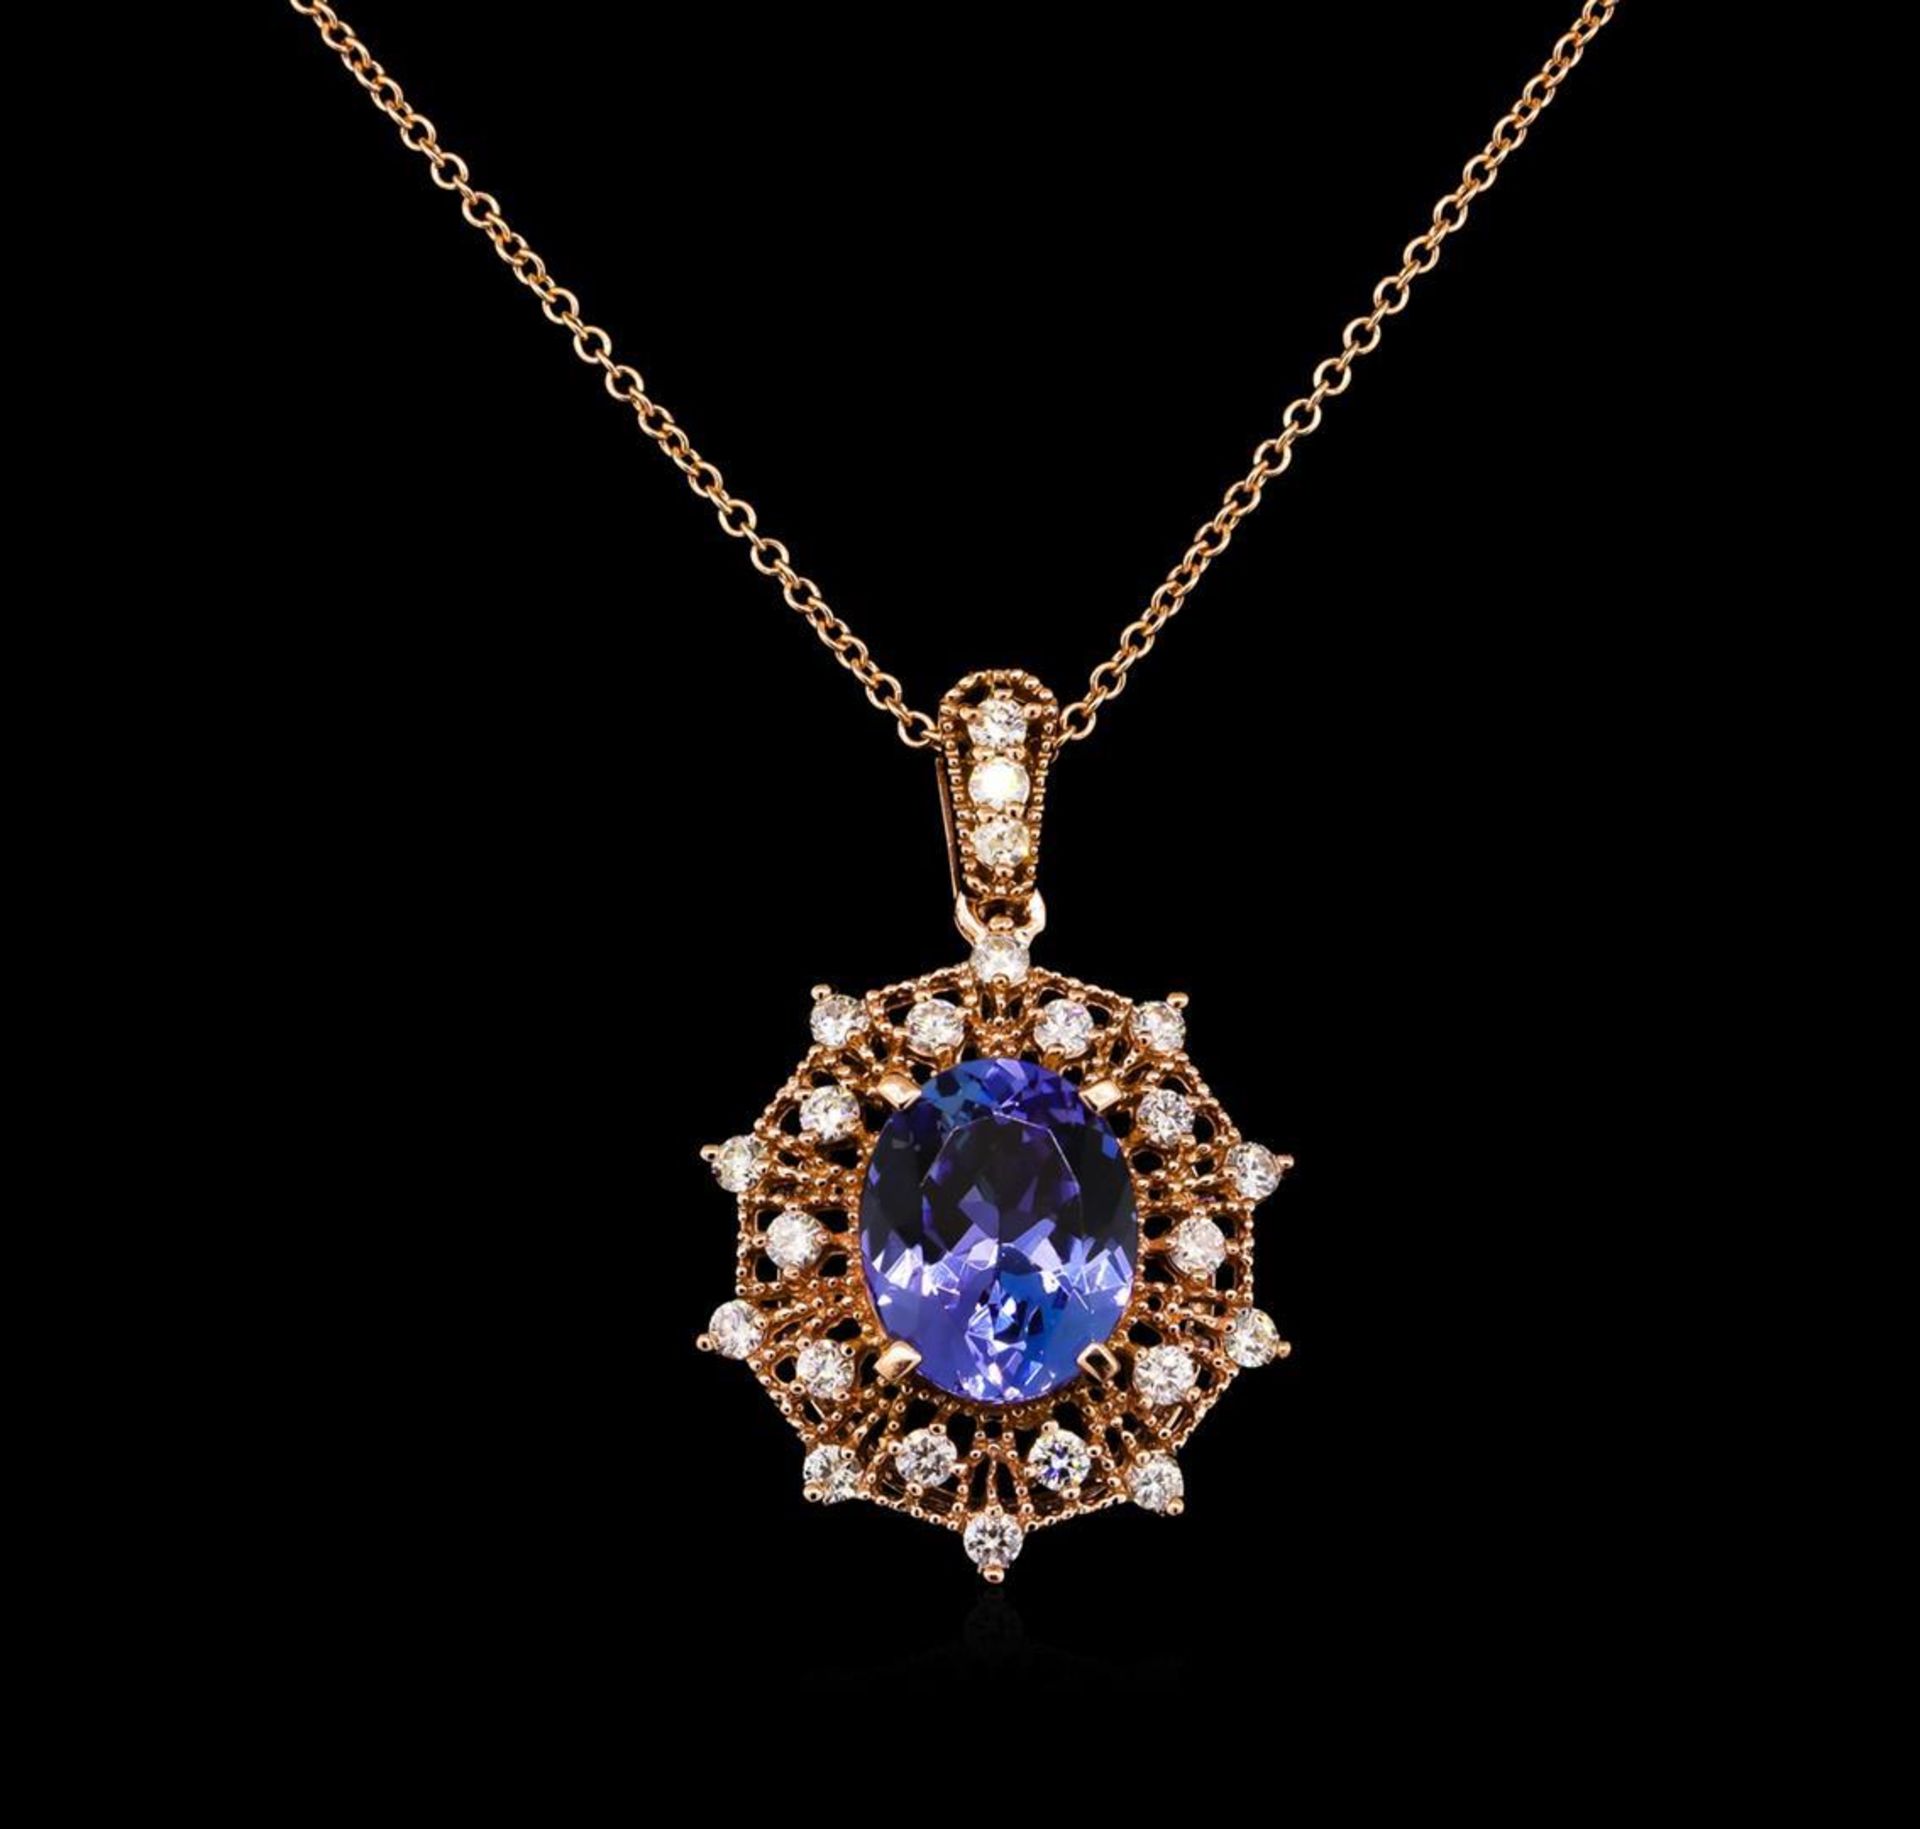 3.95ct Tanzanite and Diamond Pendant With Chain - 14KT Rose Gold